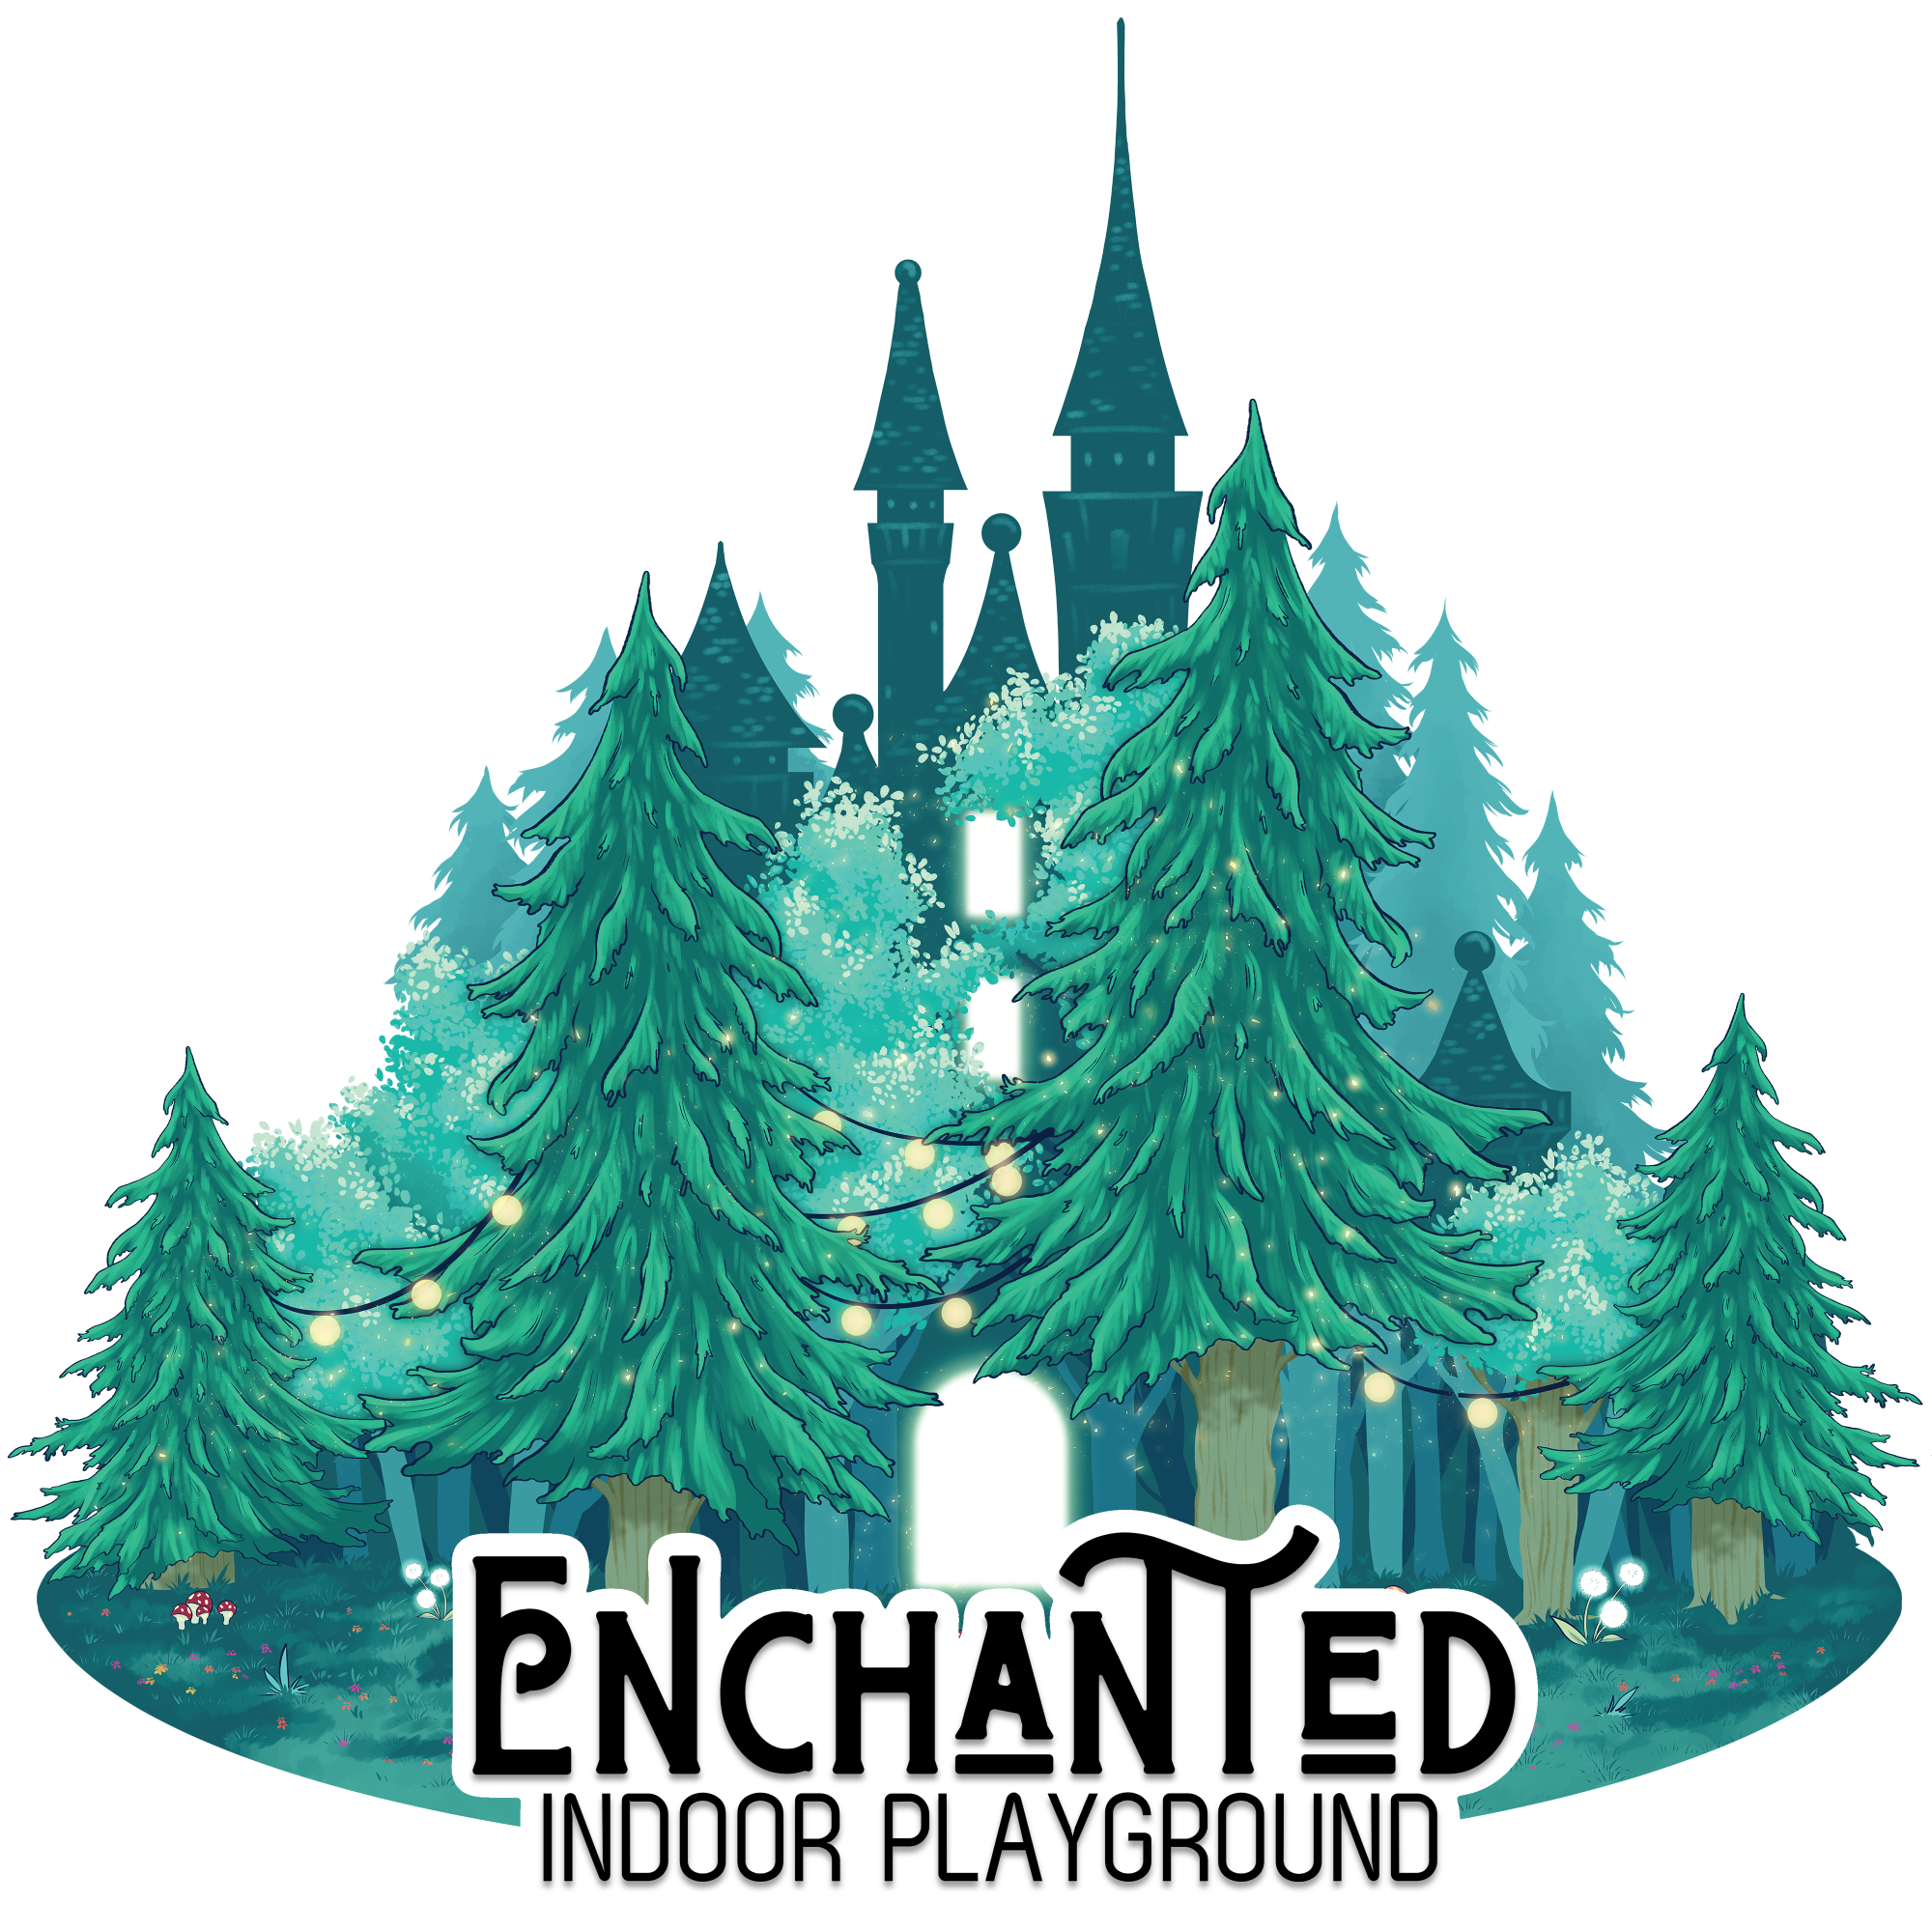 Enchanted indoor playground logo with a castle hidden by sequoias